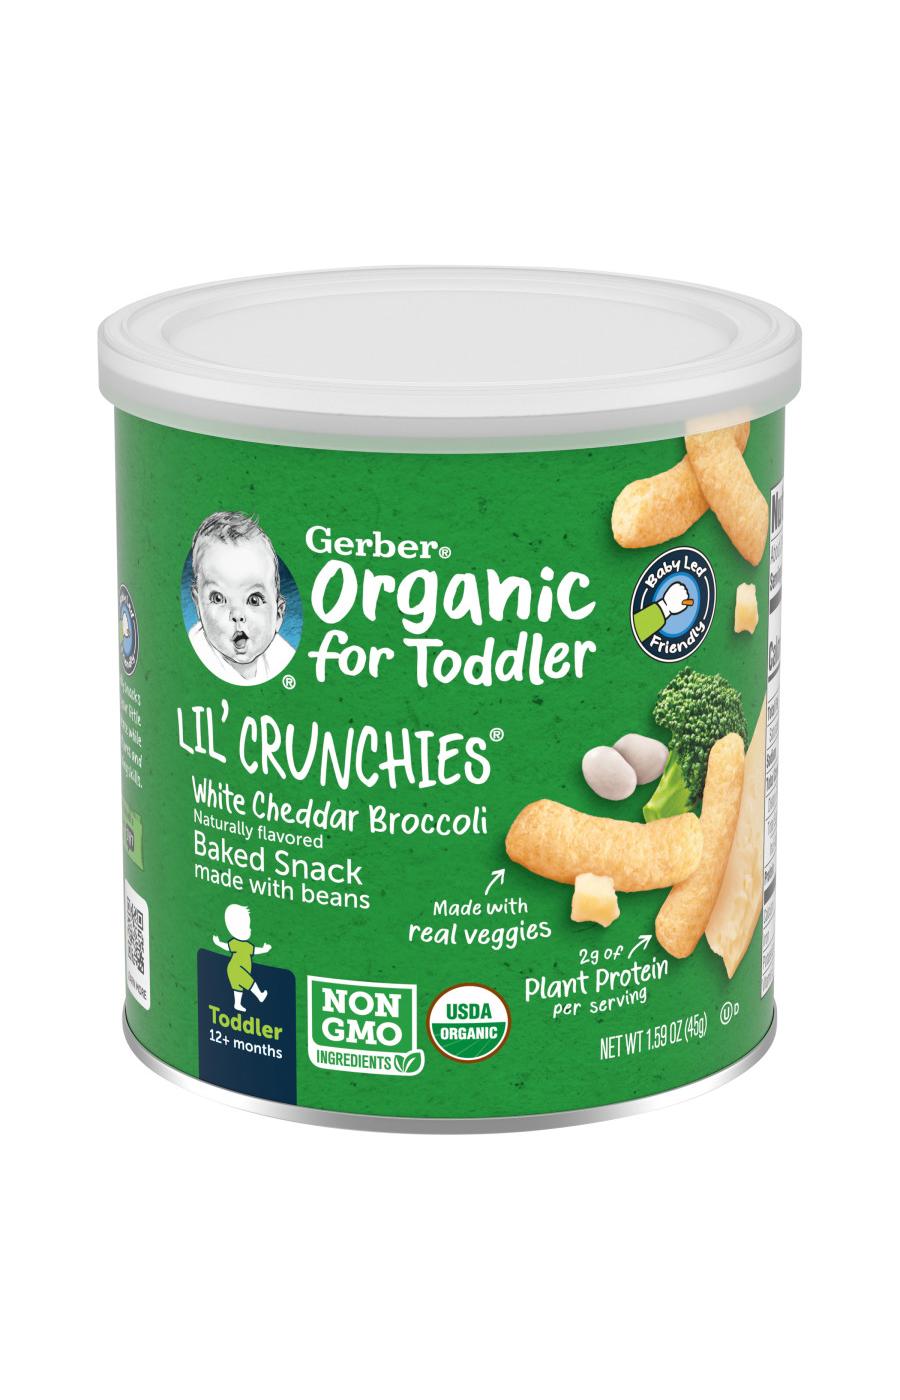 Gerber Organic for Toddler Lil' Crunchies - White Cheddar Broccoli; image 1 of 8